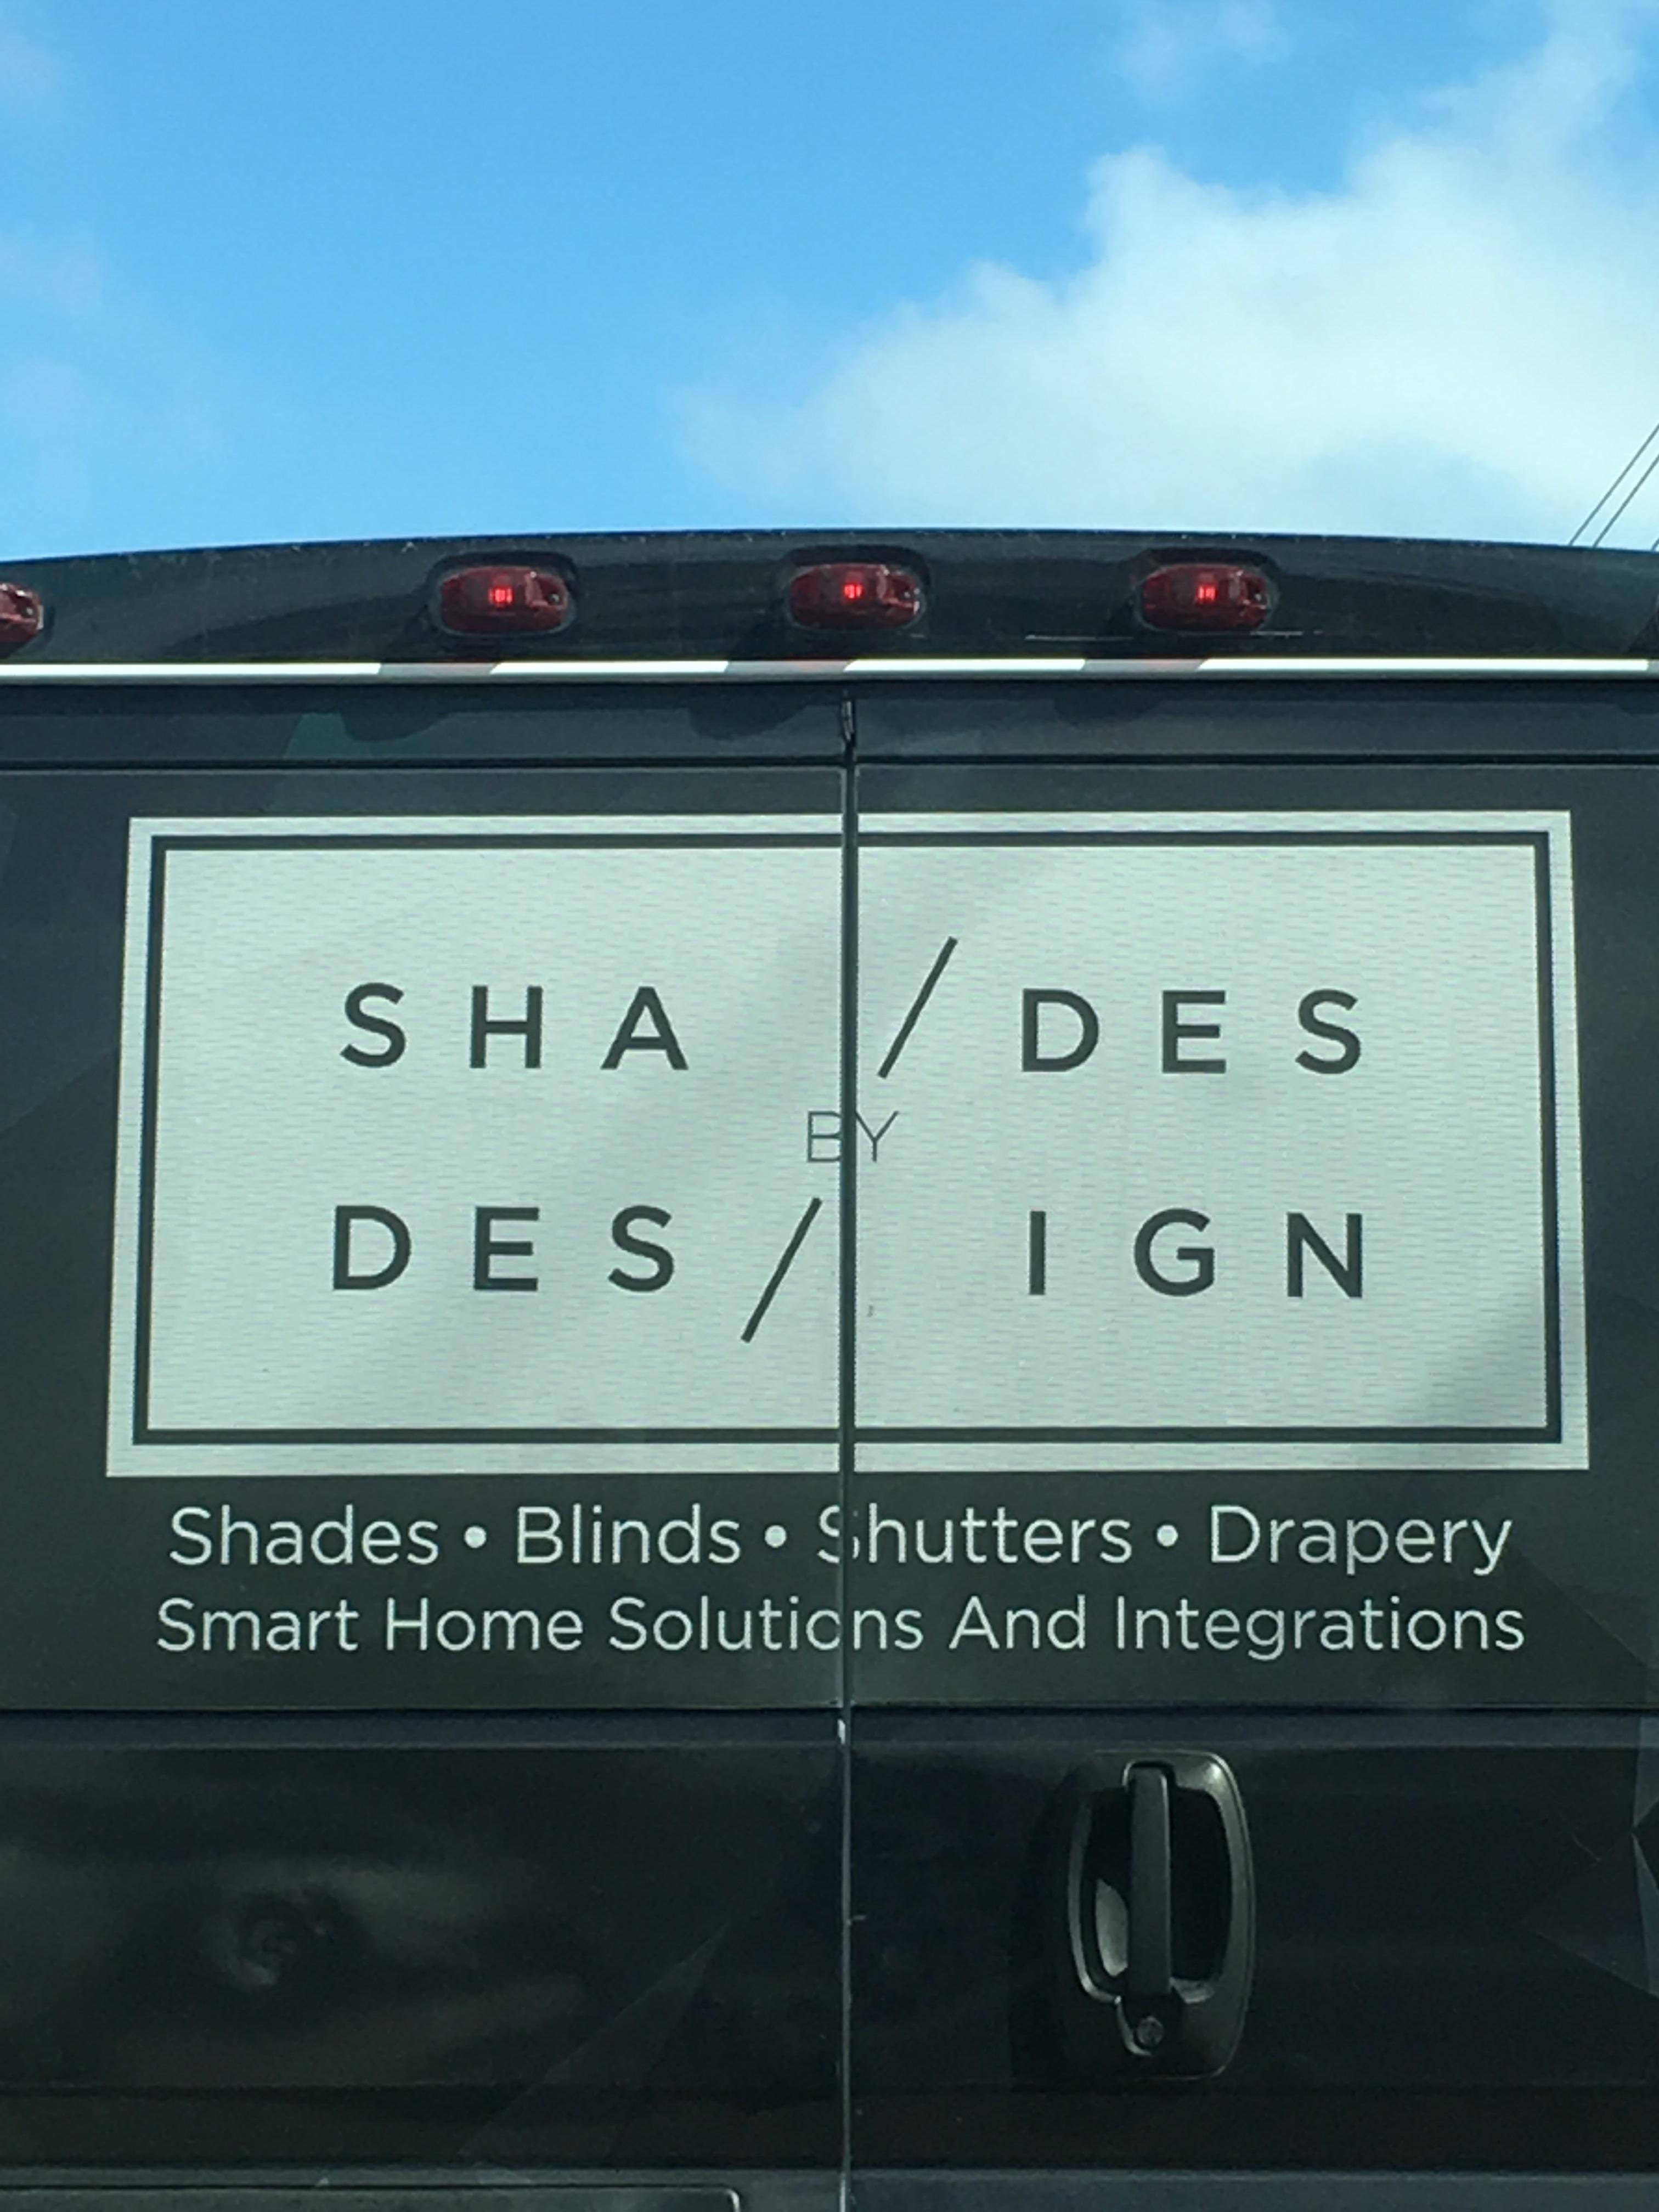 shades by design - Shades Design Ey Shades. Blinds. Shutters . Drapery Smart Home Solutions And Integrations